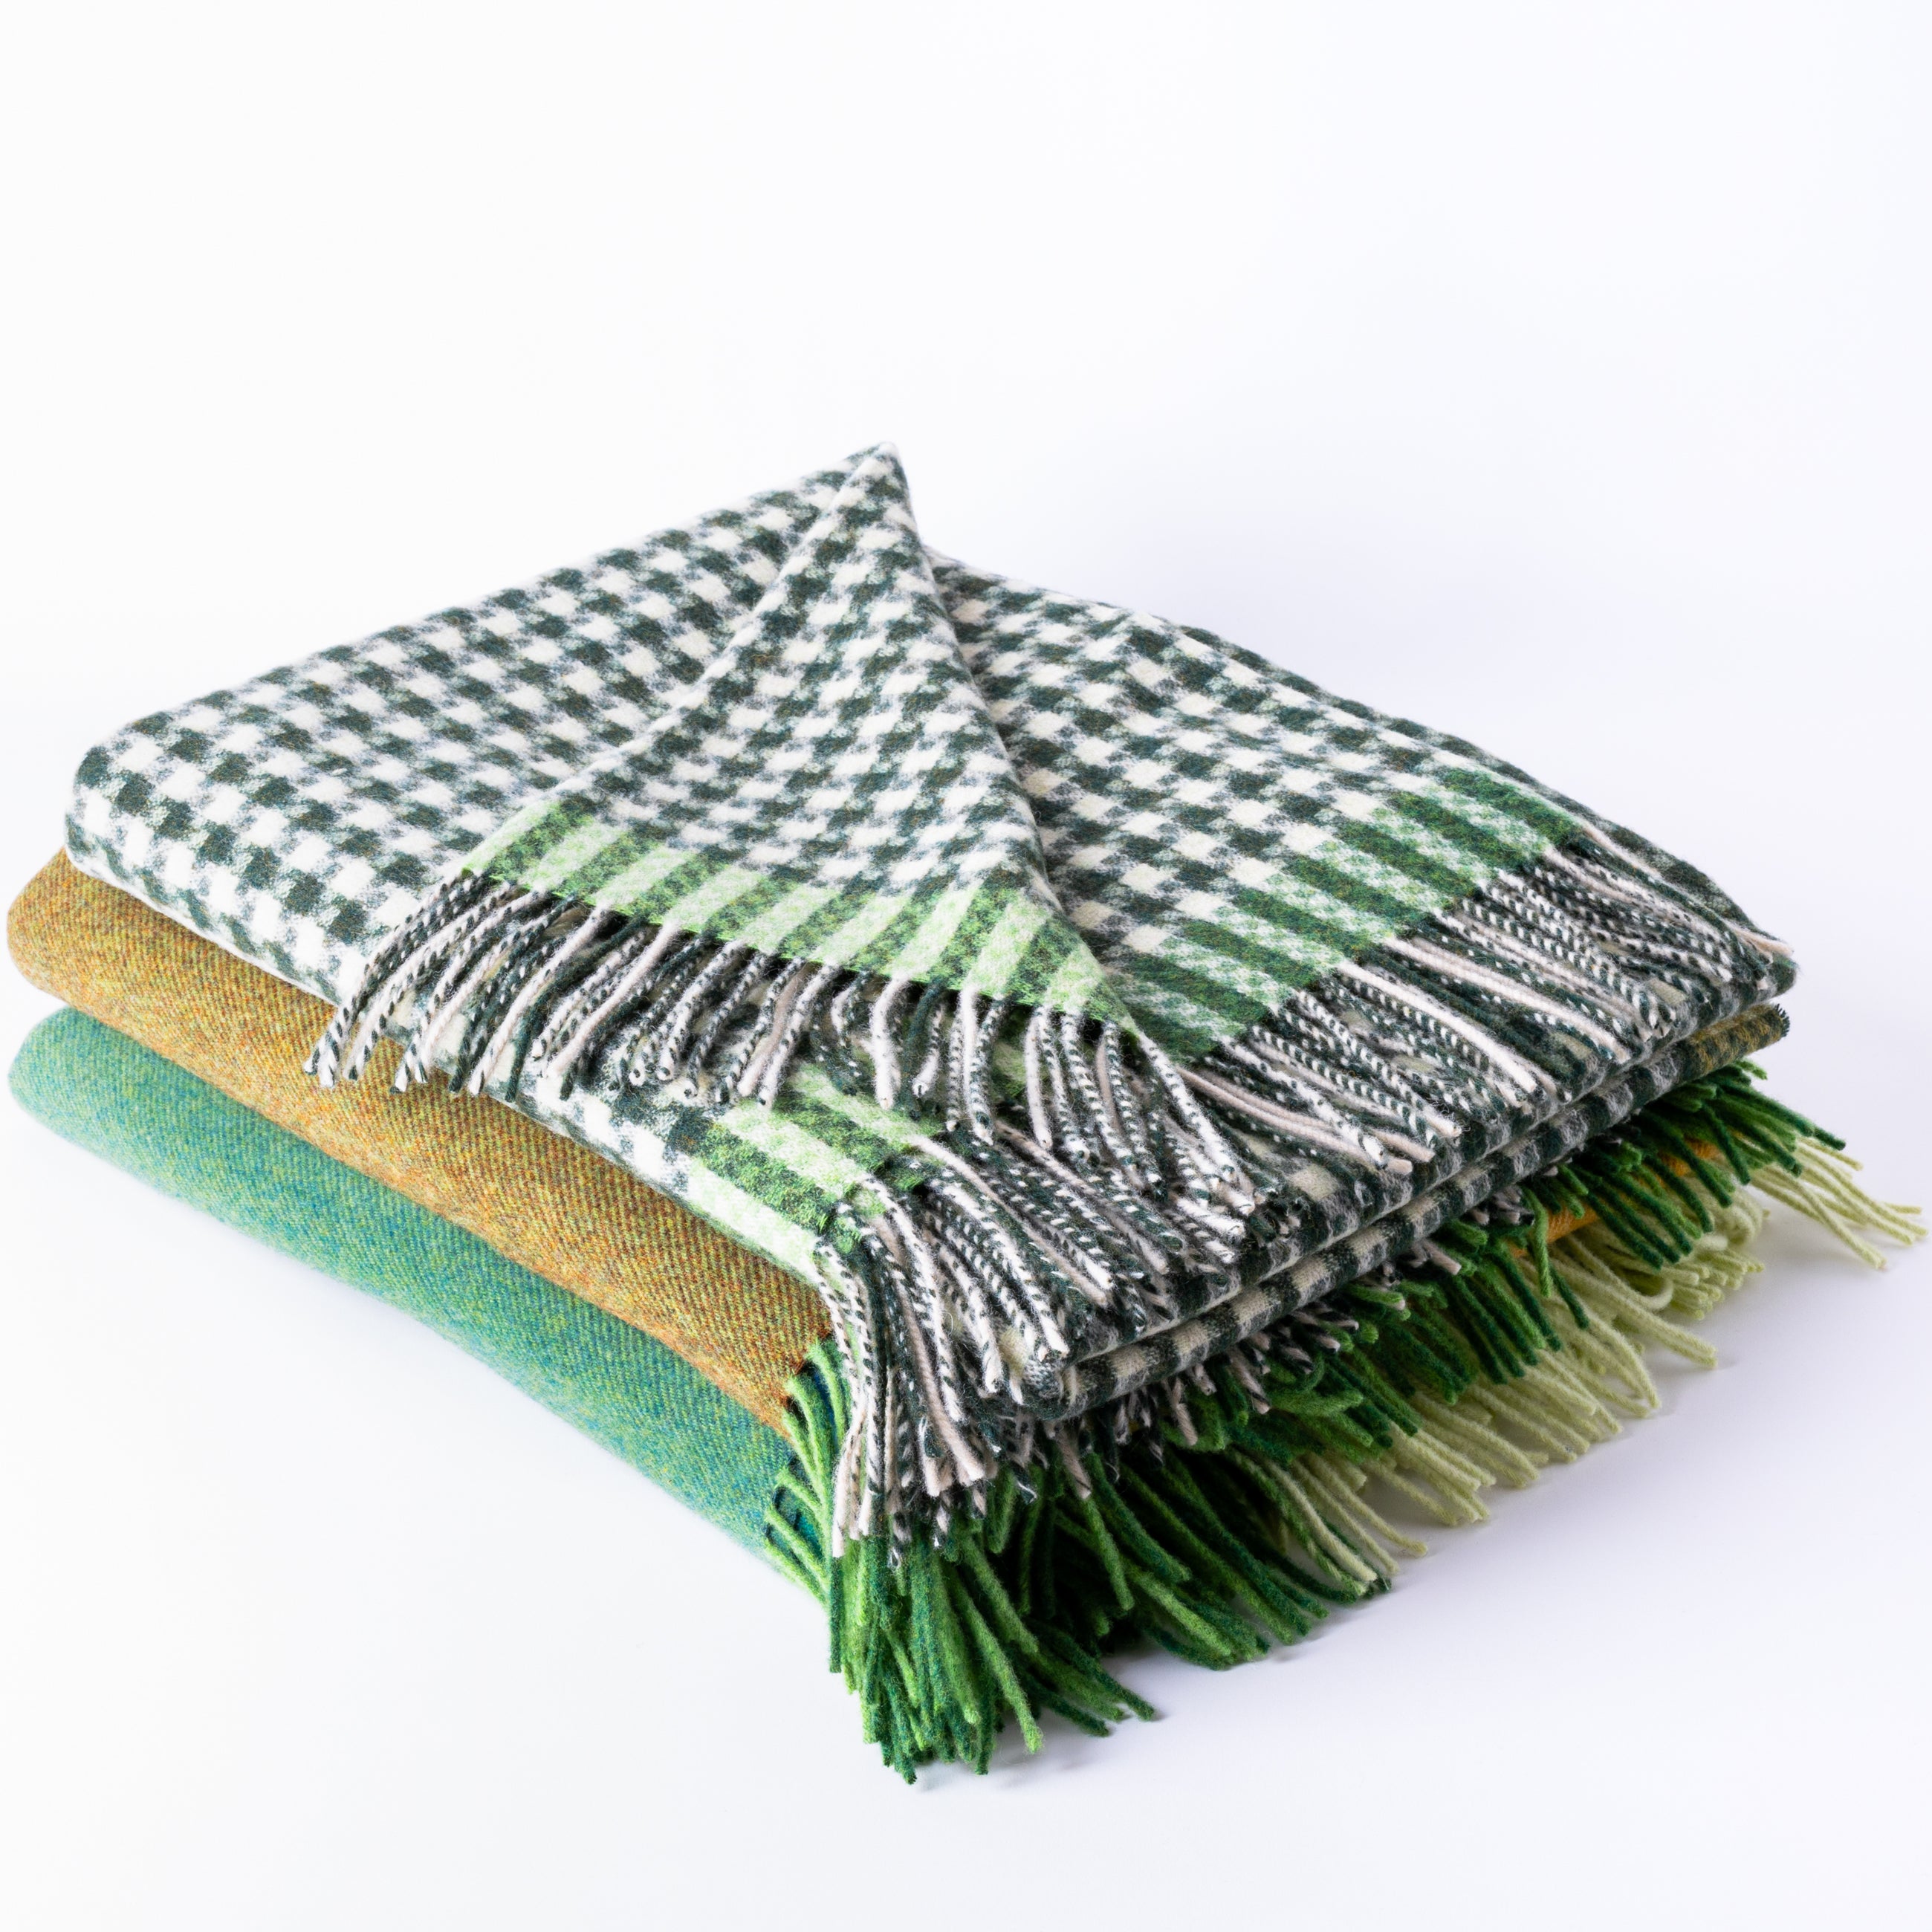 Lambswool Houndstooth Throw